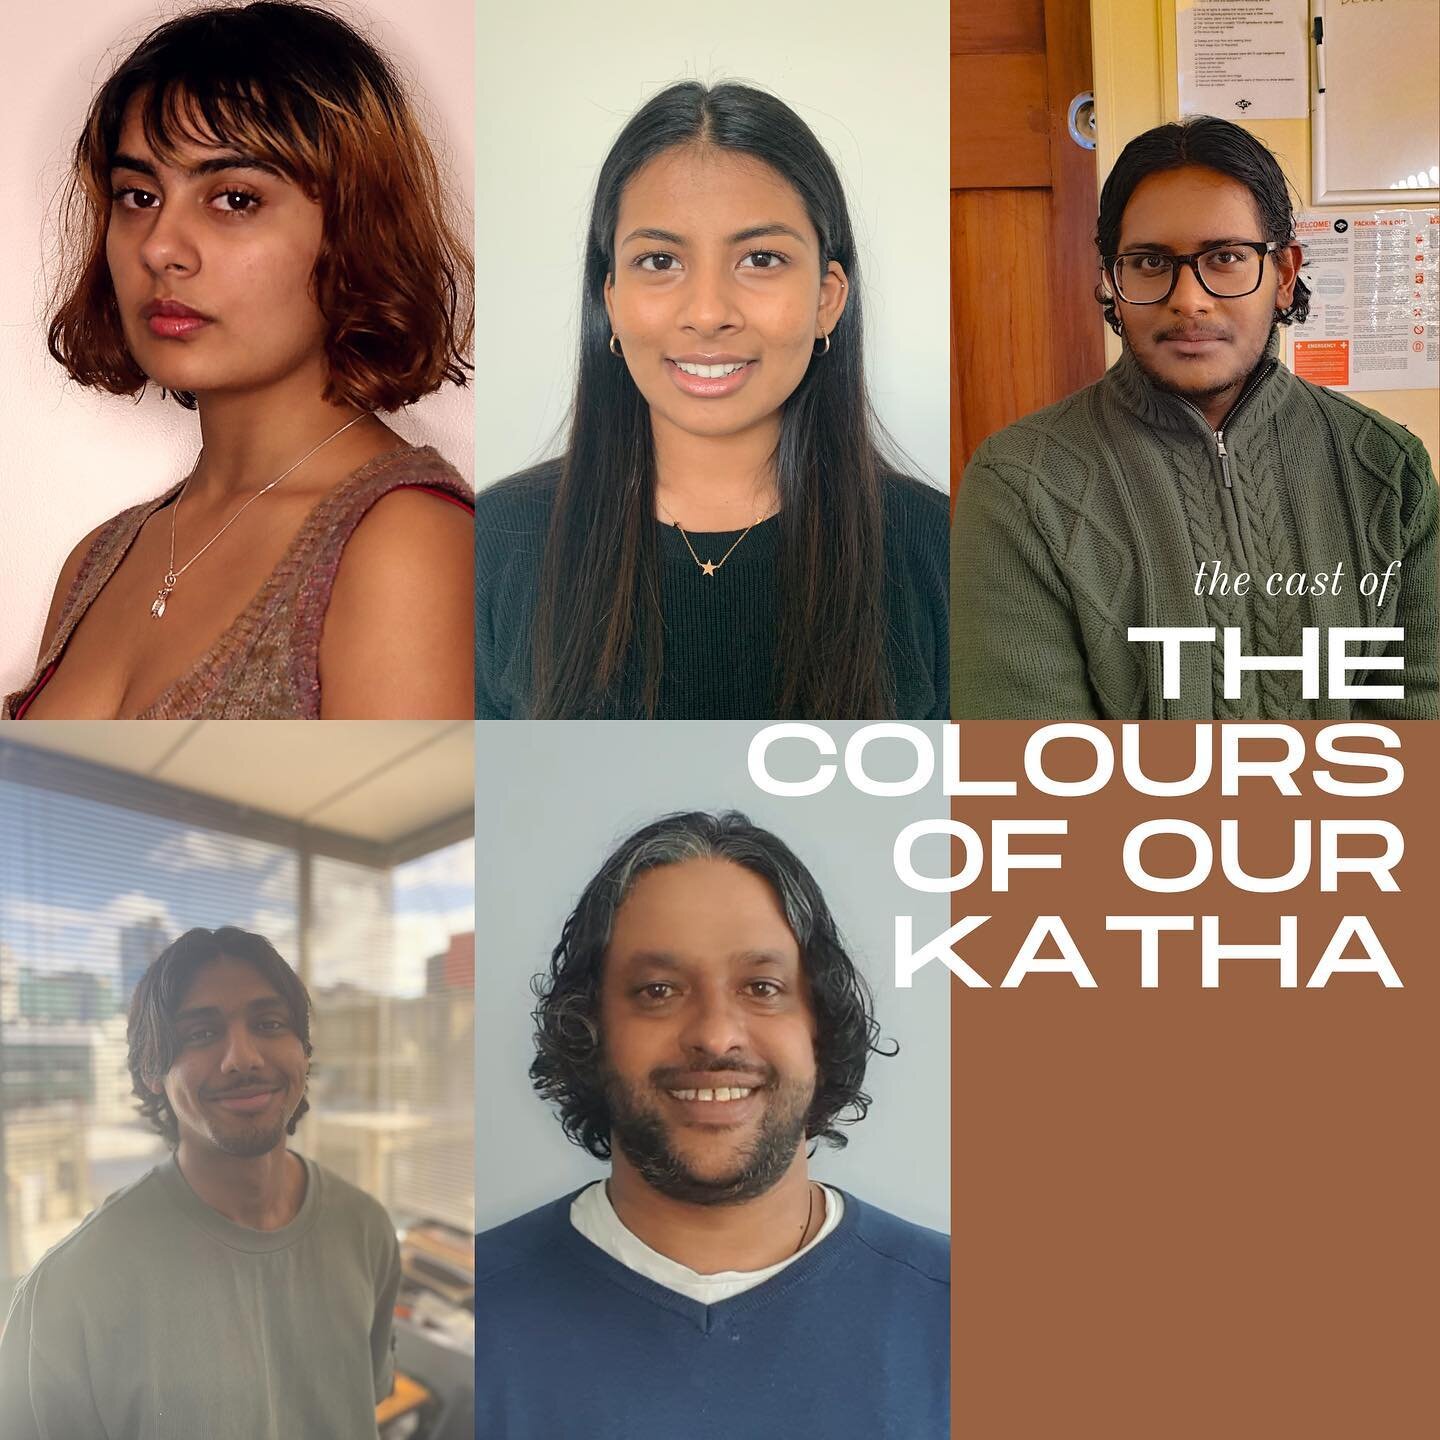 ✨In the cast of &quot;The Colours of Our Katha&quot; by Ronia Ibrahim, we have Isla Bhatnagar, Alisha Jacobs, Karmeehan Senthilnathan, Shyamal Singh and Shaneel Sidal! 

&lsquo;The Colours of Our Katha&rsquo; is a FREE play reading event. It is part 